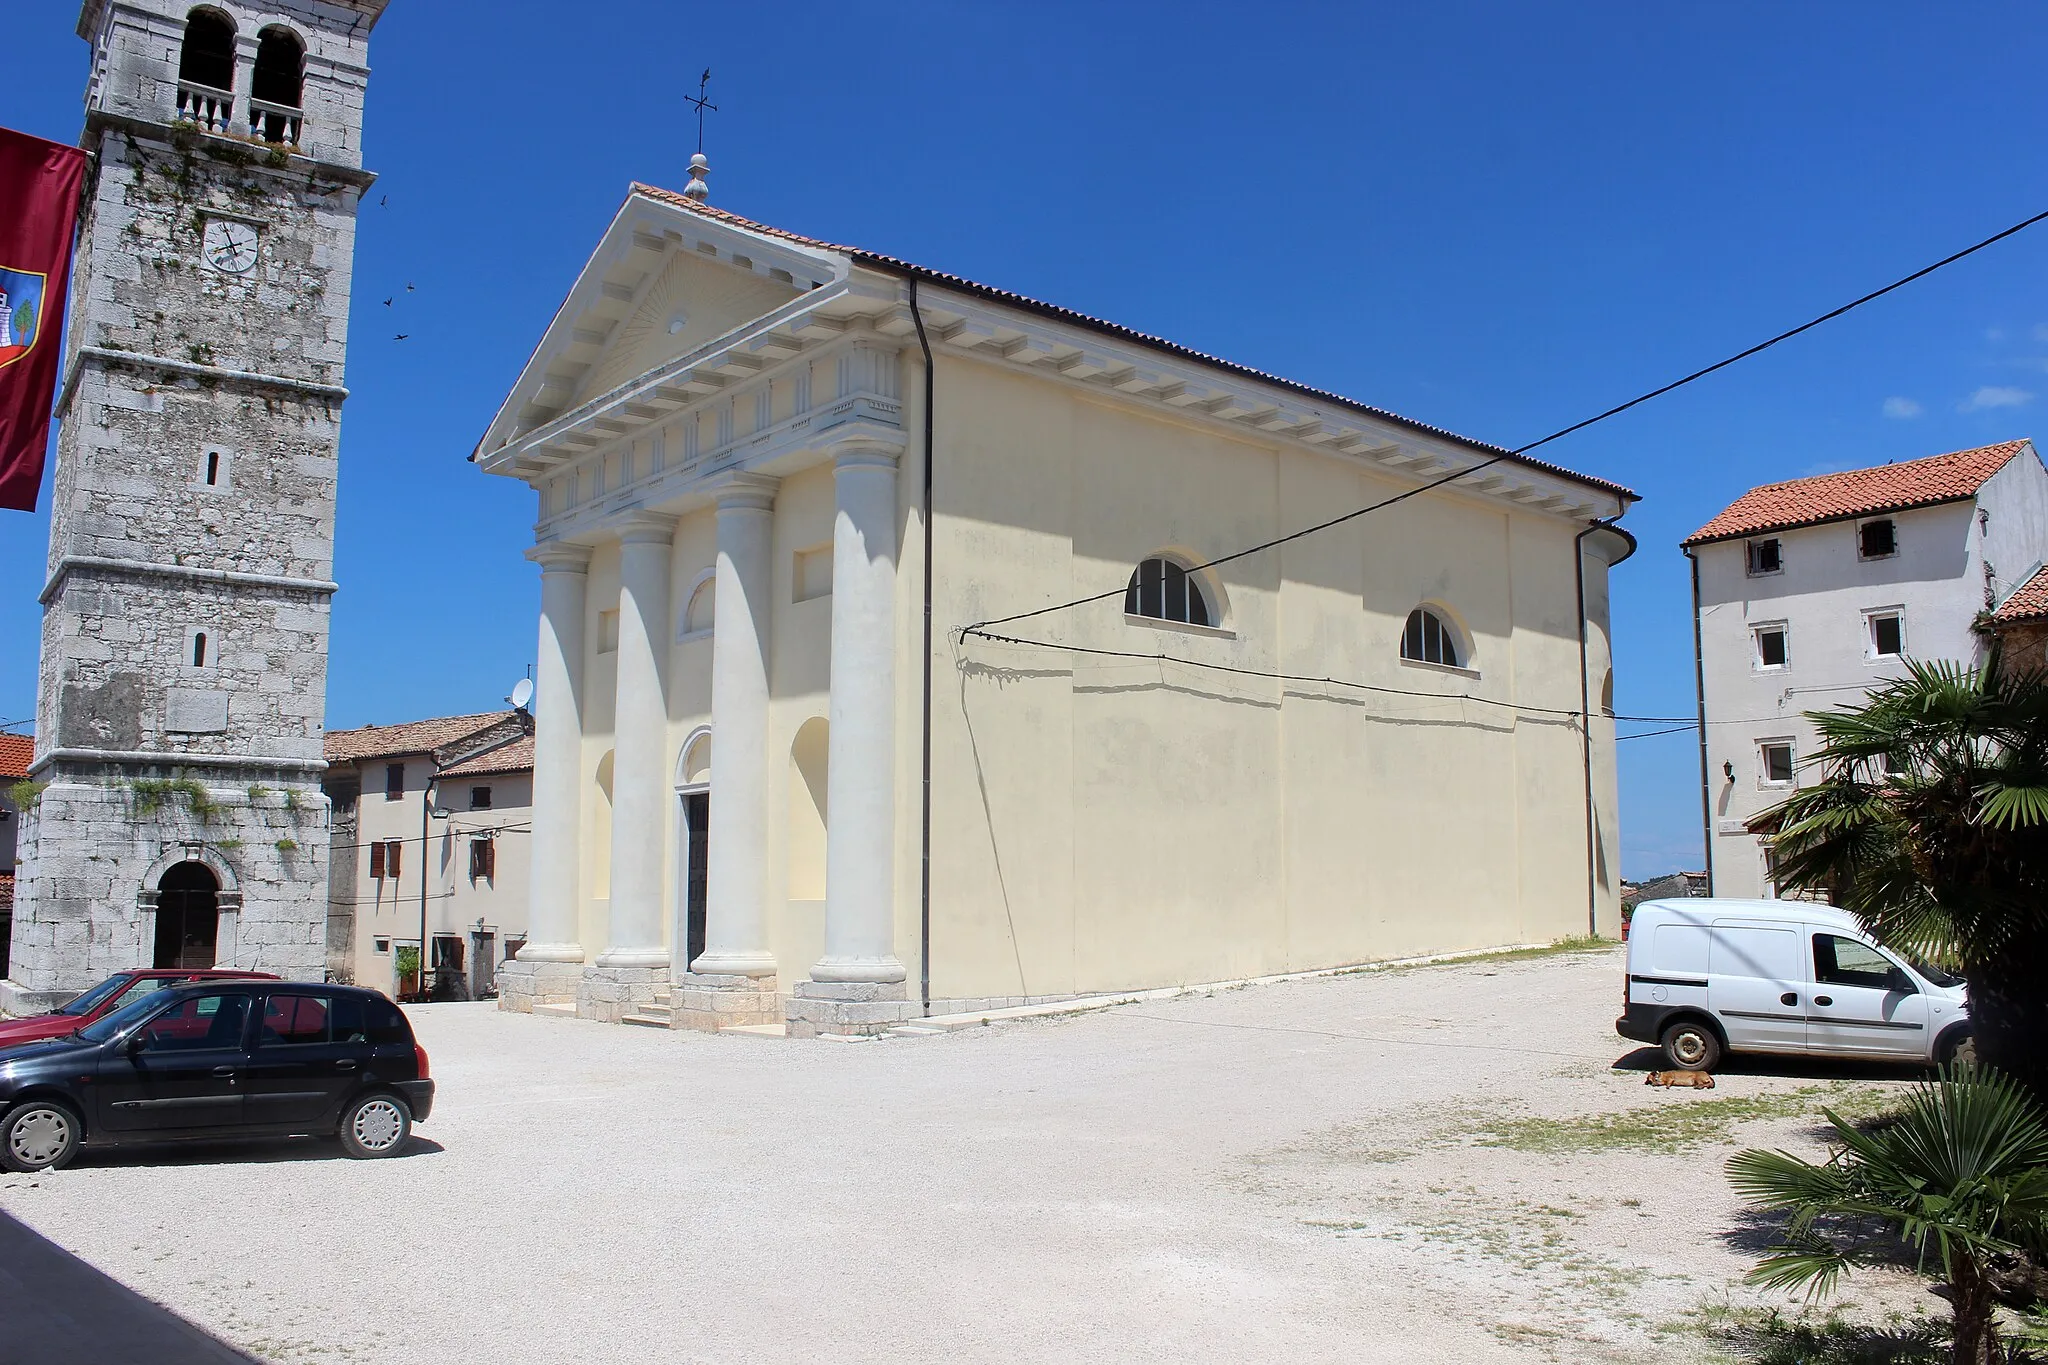 Photo showing: Church of Saints Cyricus and Julitta, with the bell tower, in Višnjan, Croatia